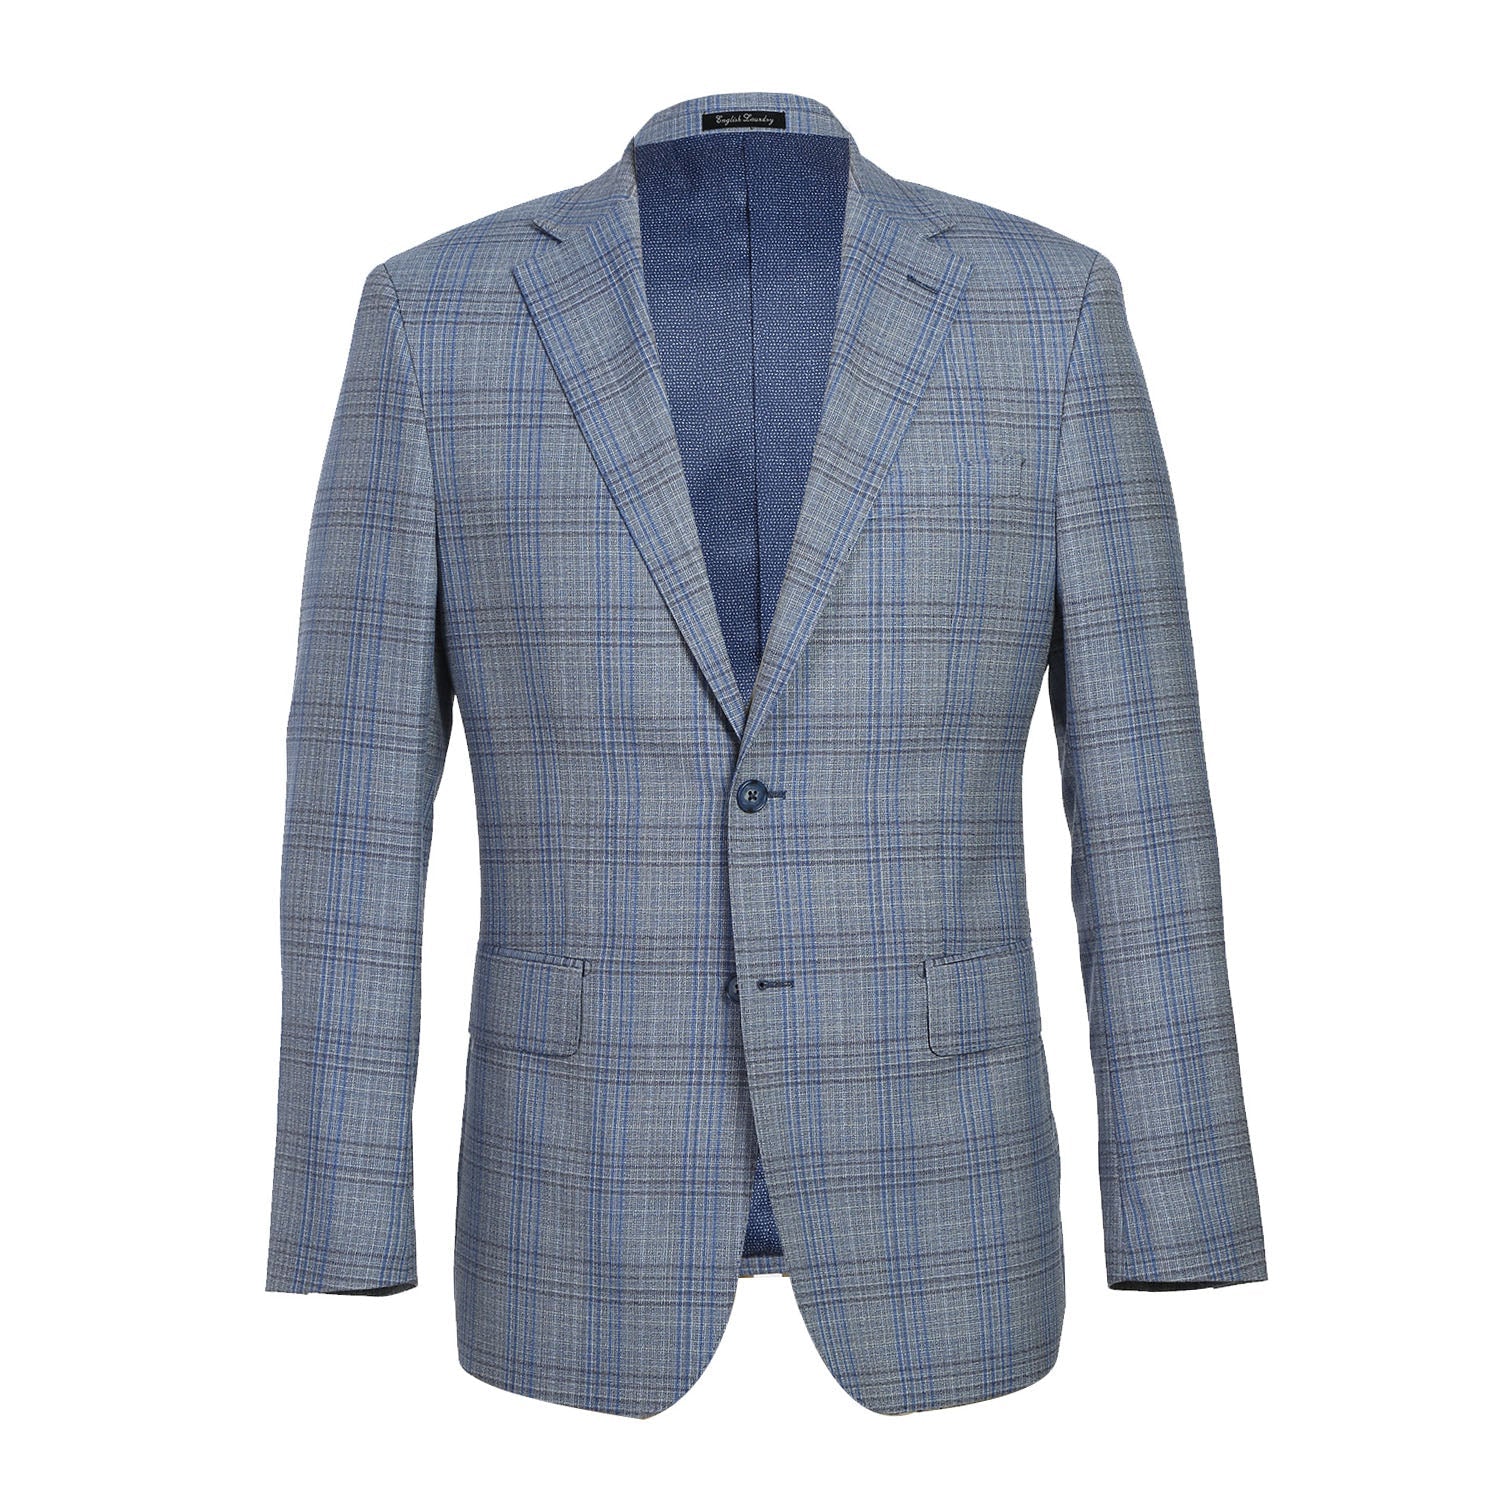 English Laundry Light Gray with Blue Check Wool Suit 2